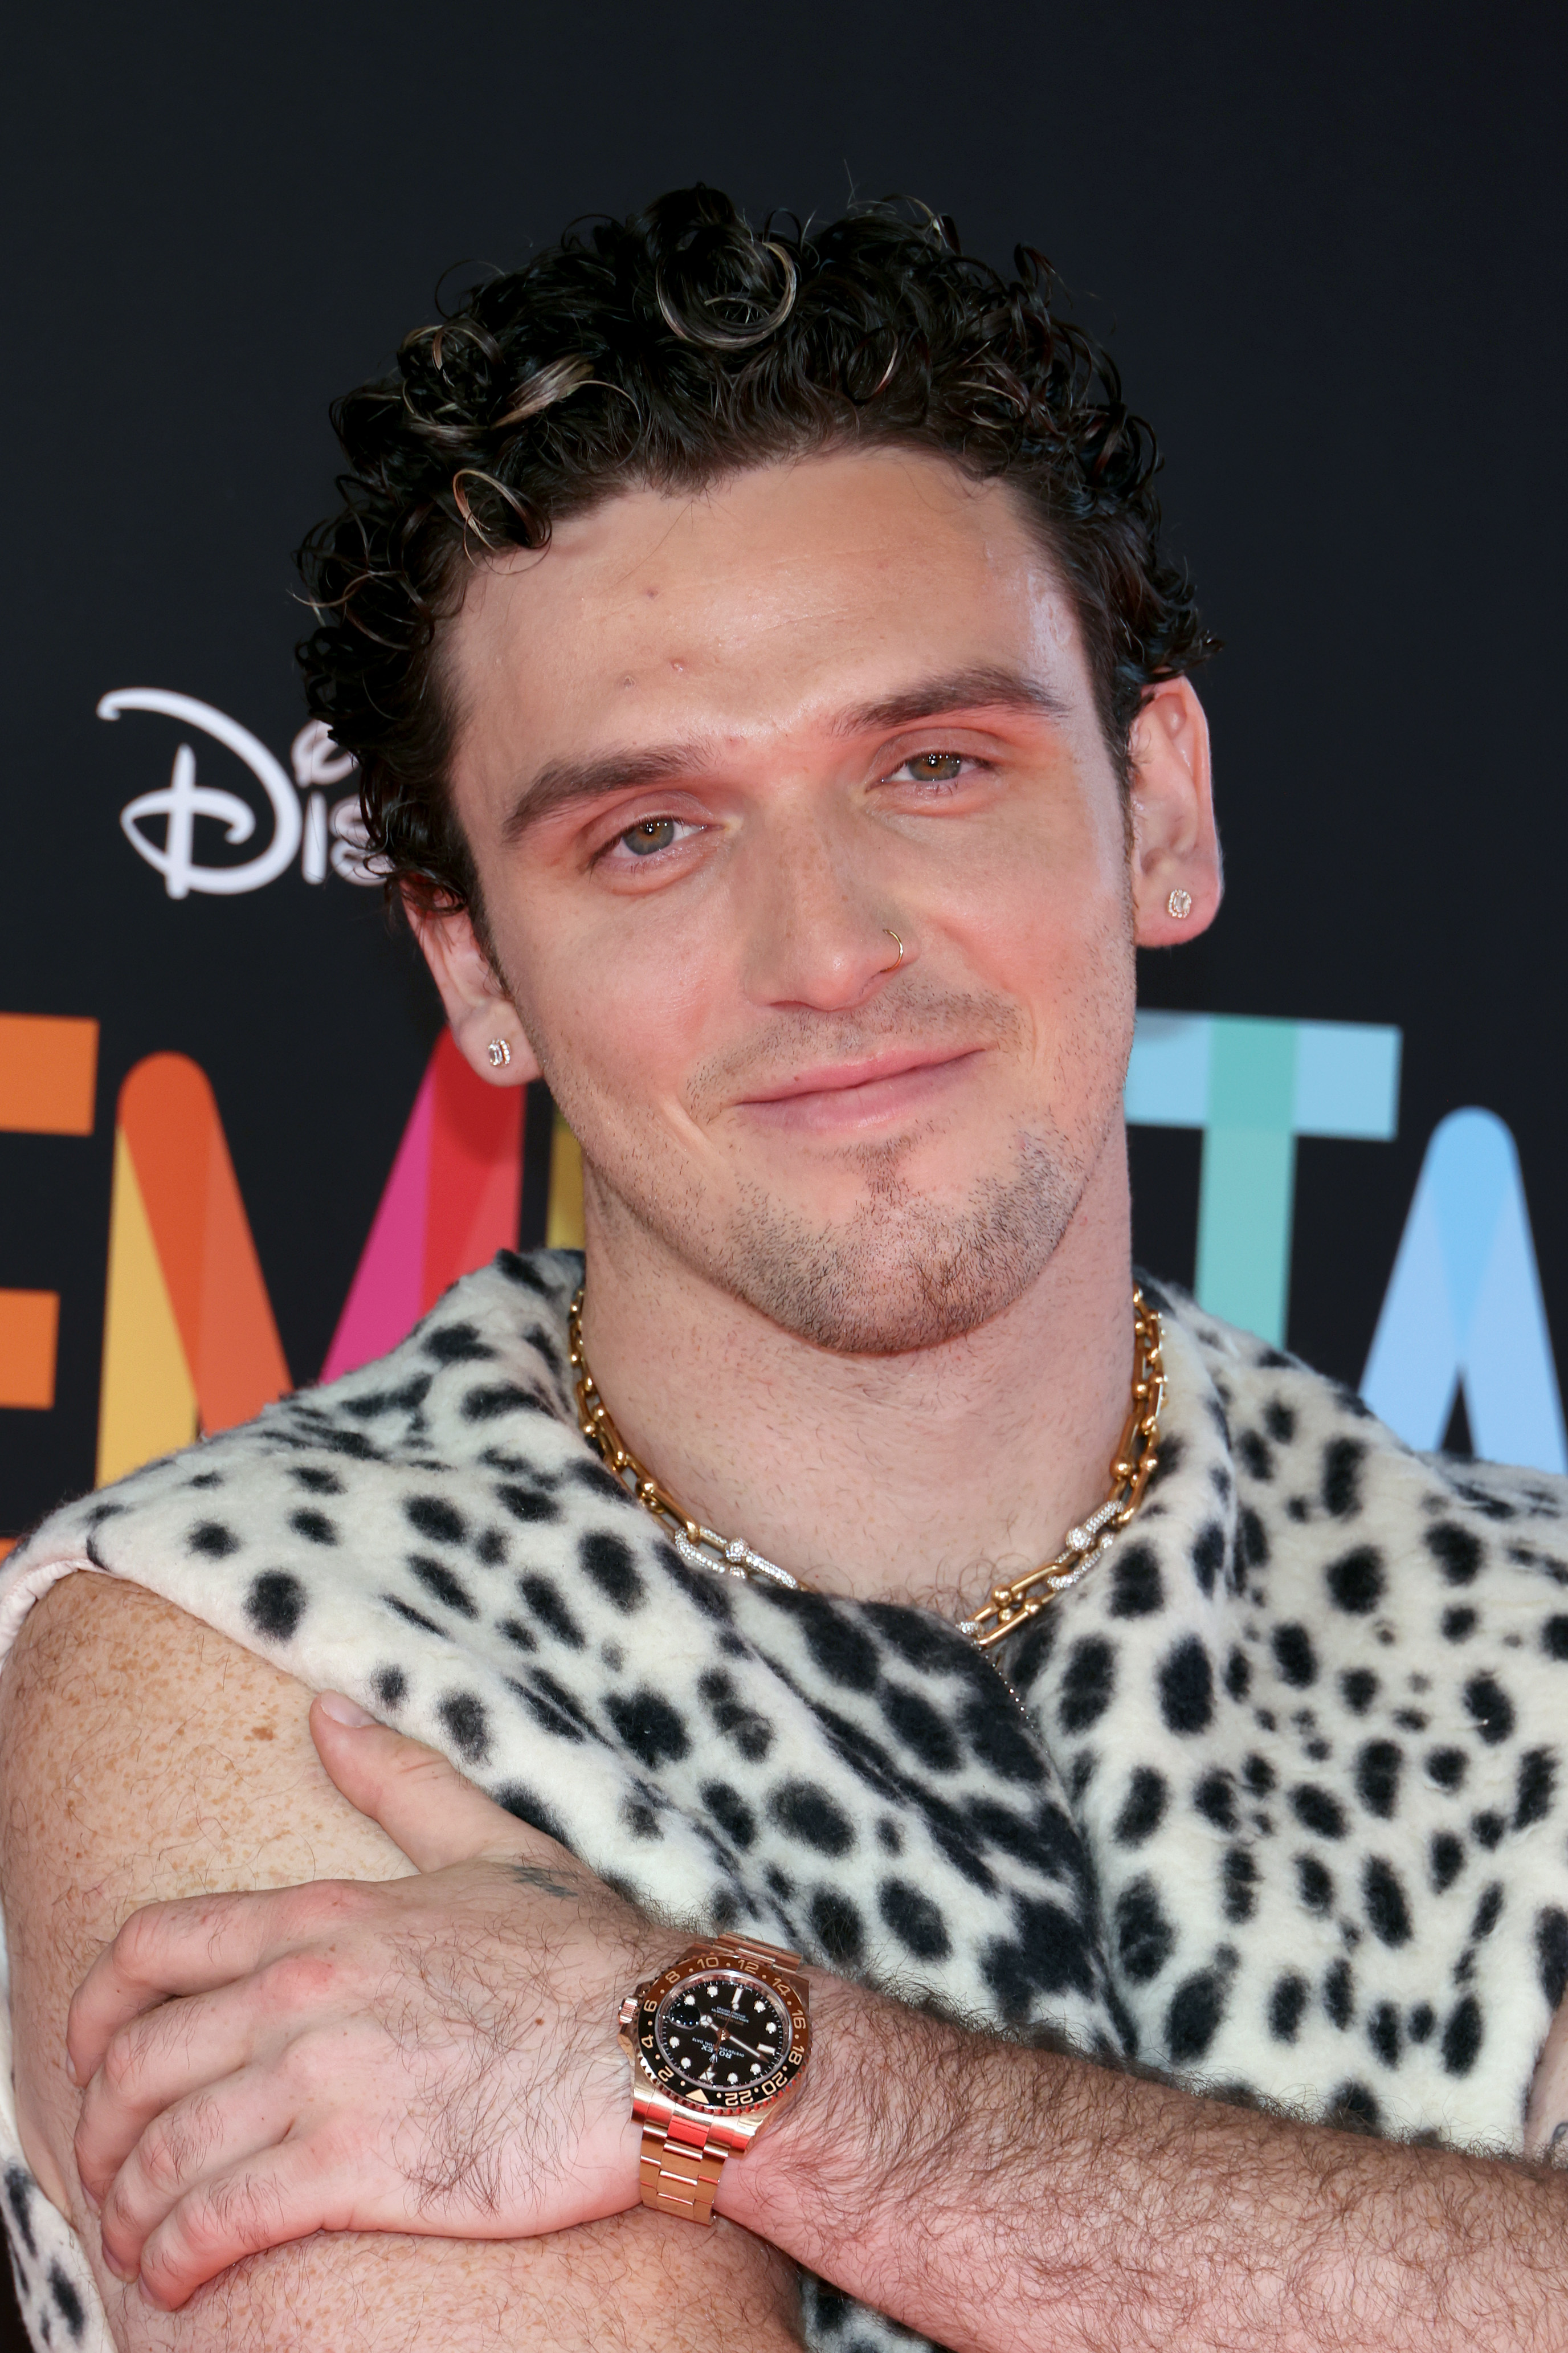 Lauv at the premiere of "Elemental" on June 8, 2023, in Los Angeles, California. | Source: Getty Images